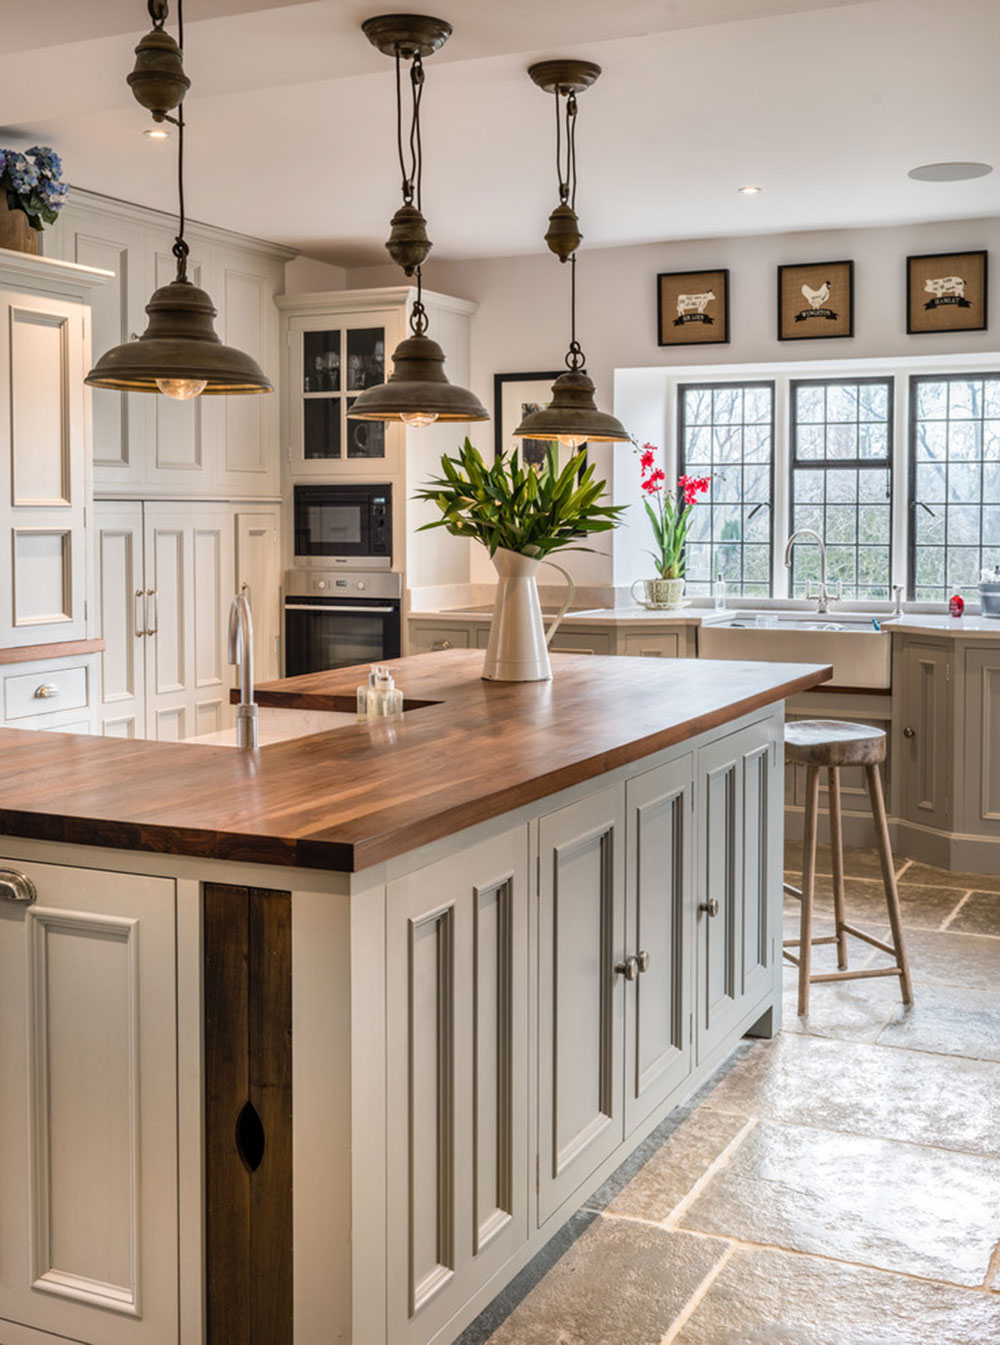 Choosing Good Kitchen Furniture Could Be A Challenge